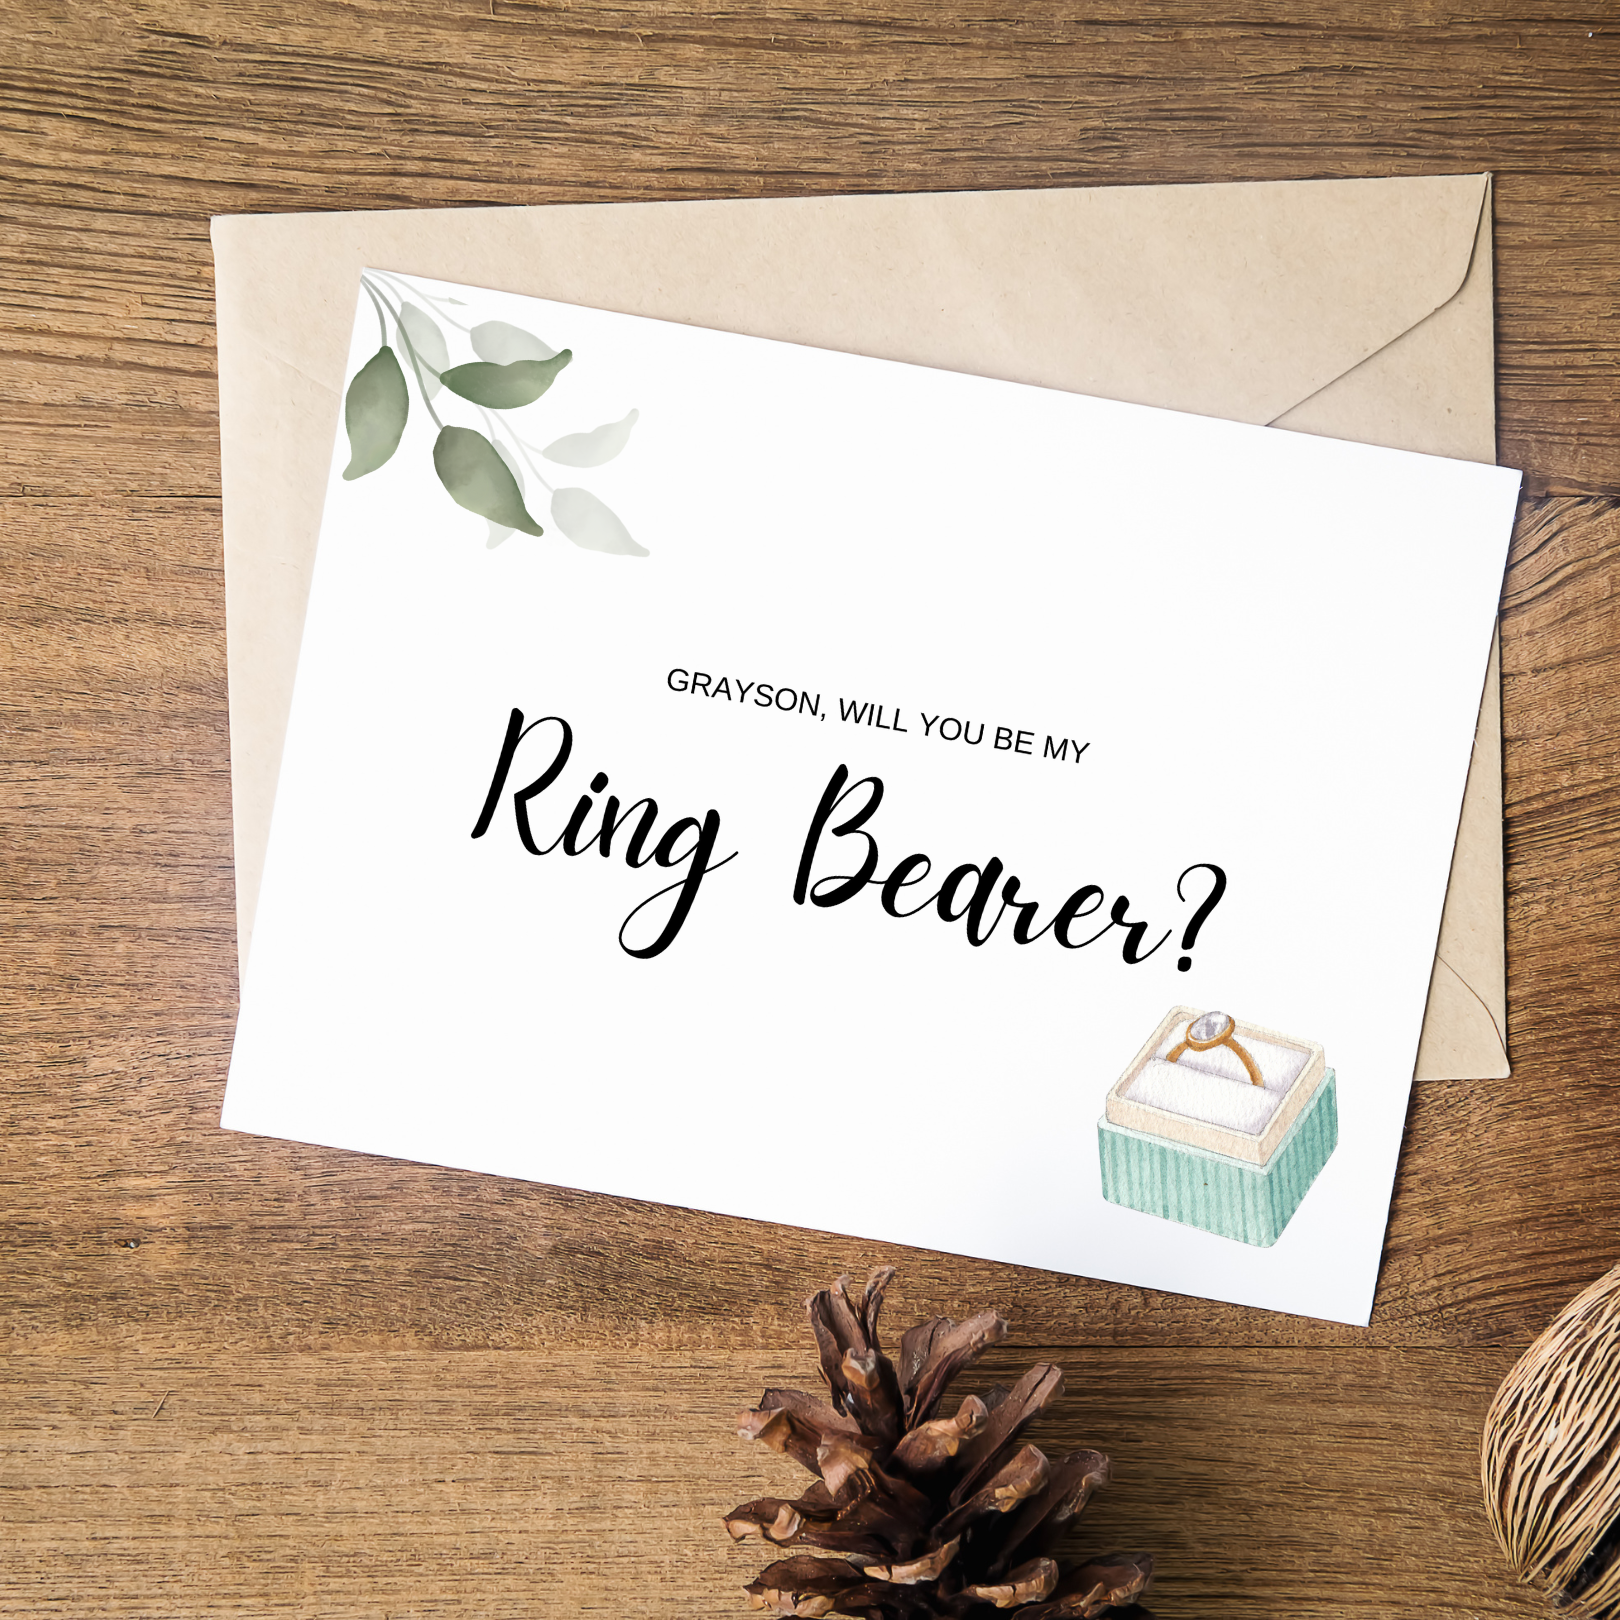 A white card can be seen with olive green leaves in the top left hand corner and a square ring box in the bottom right hand corner. The card says "Grayson, will you be my ring bearer?" and sits on top of a beige coloured envelope against a medium wood background. Below the card, there is a pine cone.